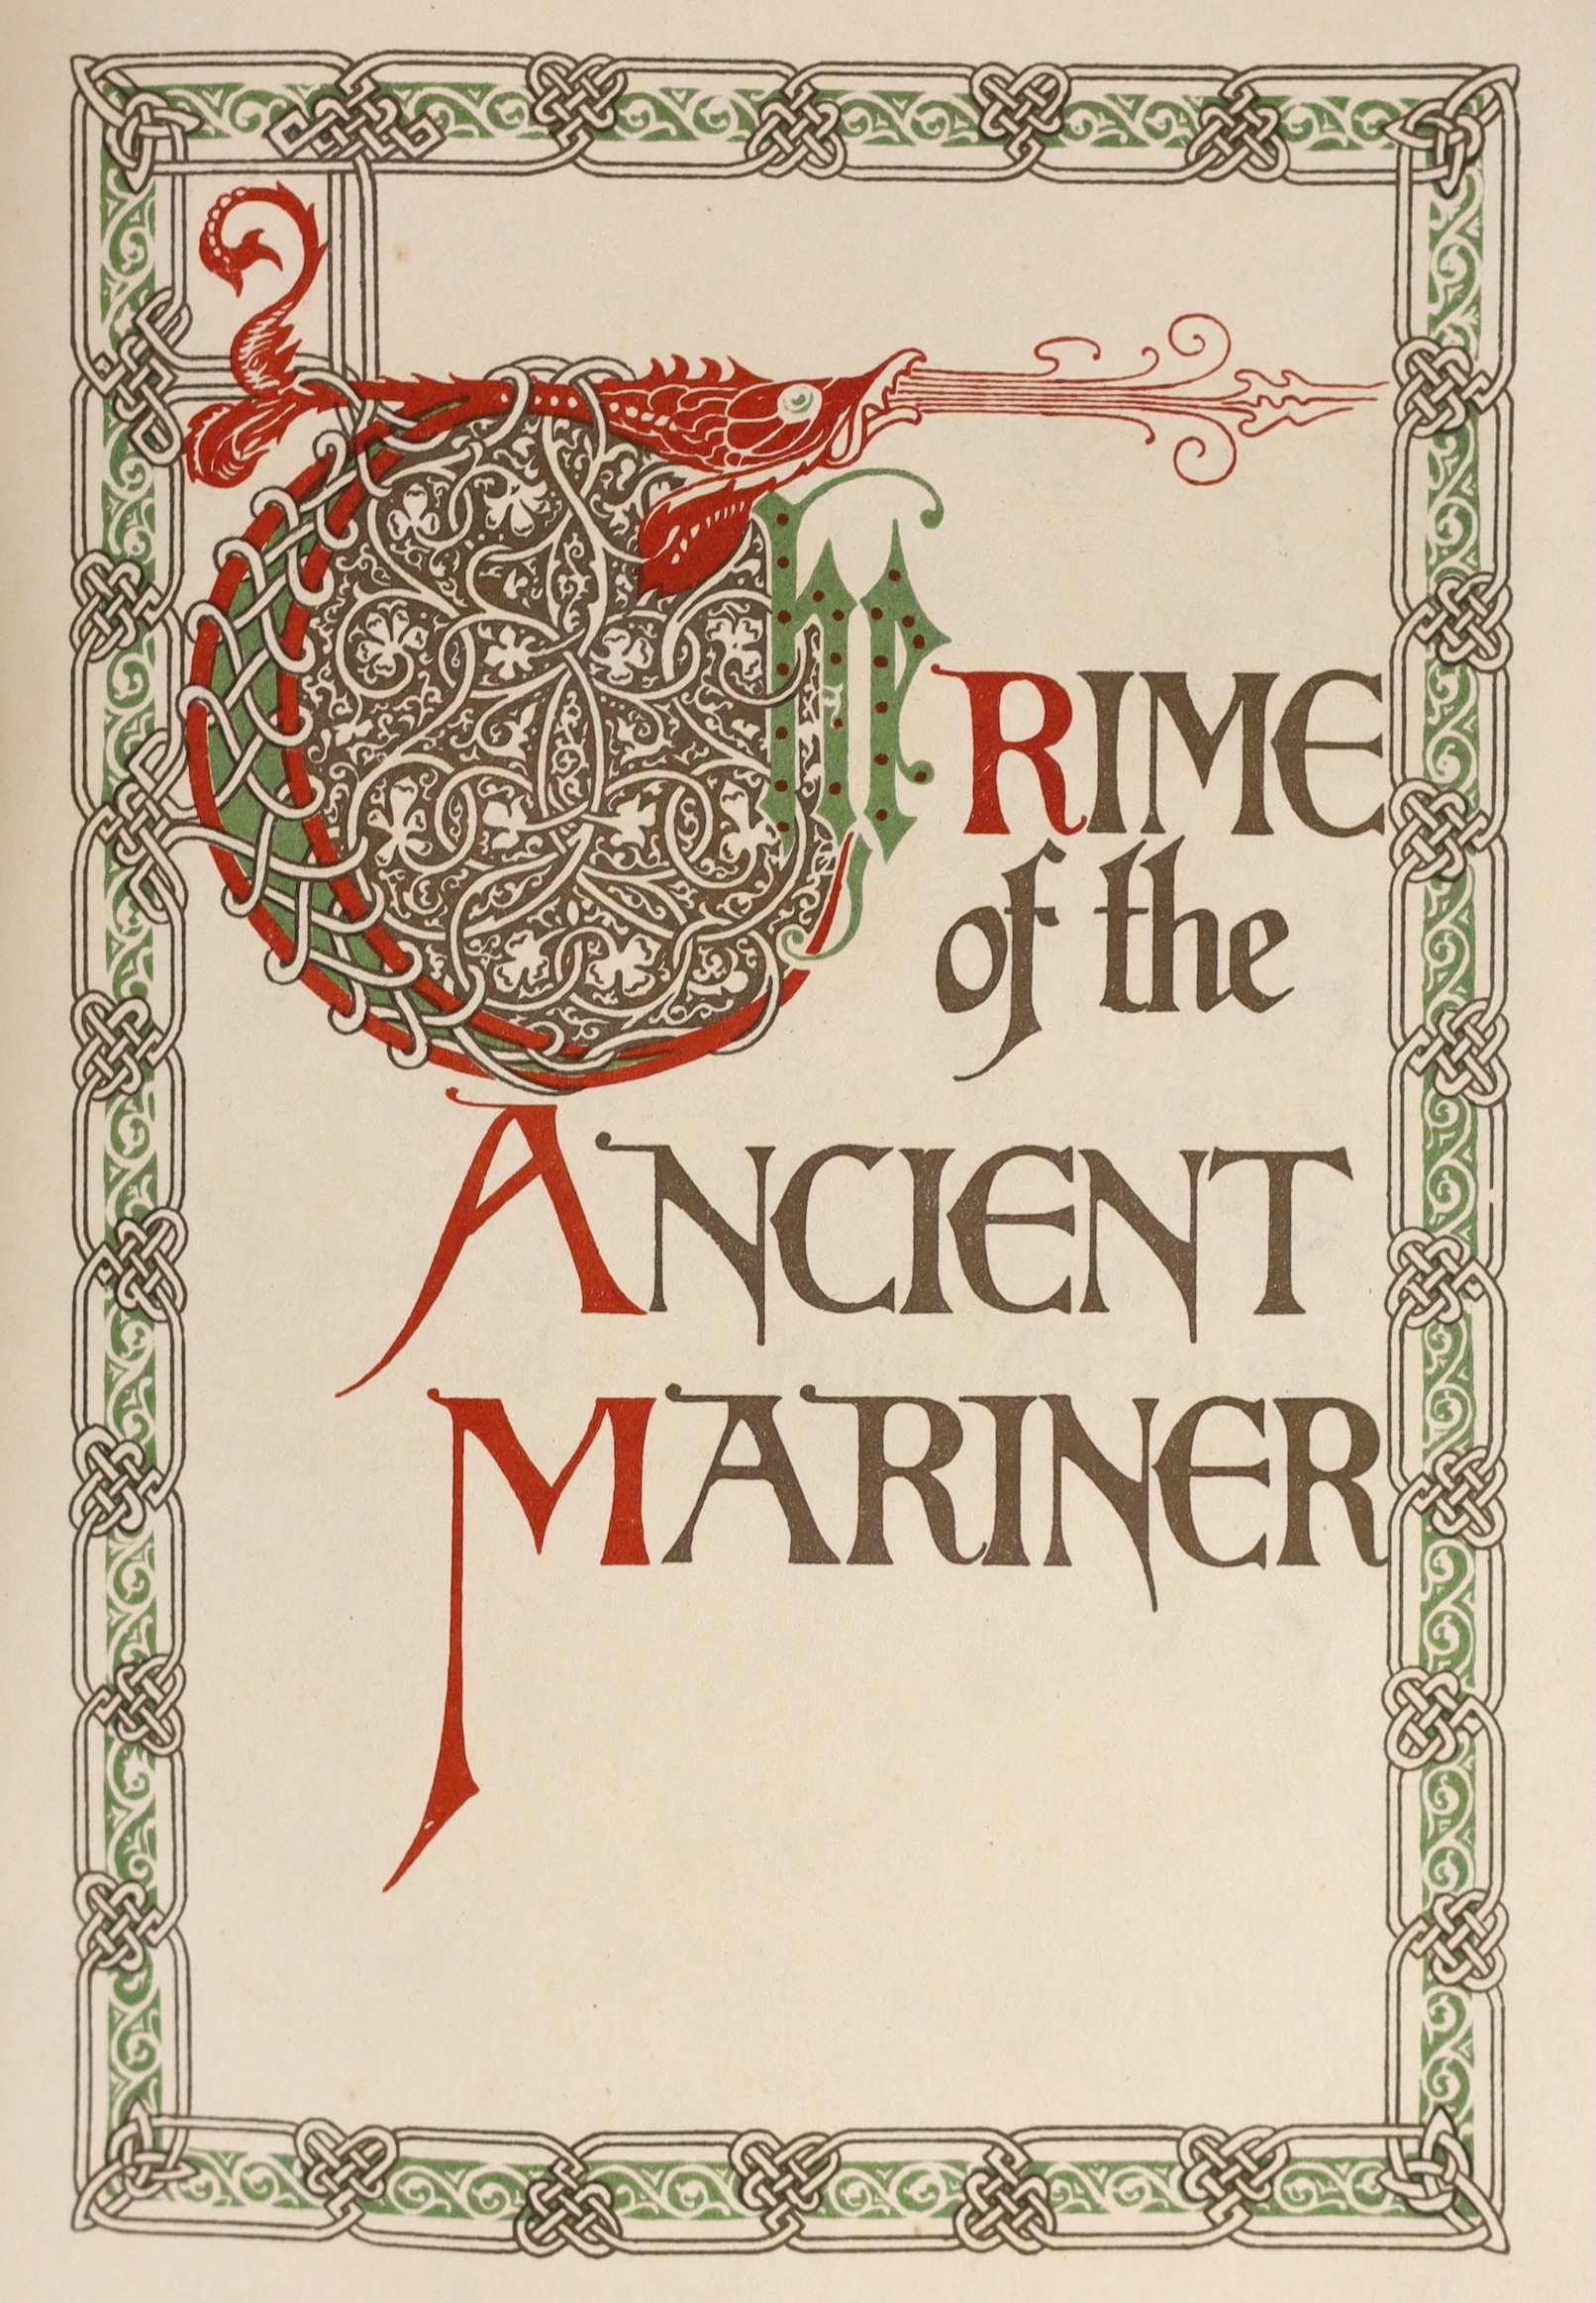 Coleridge, Samuel Taylor - The Rime of the Ancient Mariner, number 317 of 525, illustrated and signed by Willy Pogany, with coloured title and 20 tipped-in colour plates, 4to, fine binding morocco gilt extra, the upper b